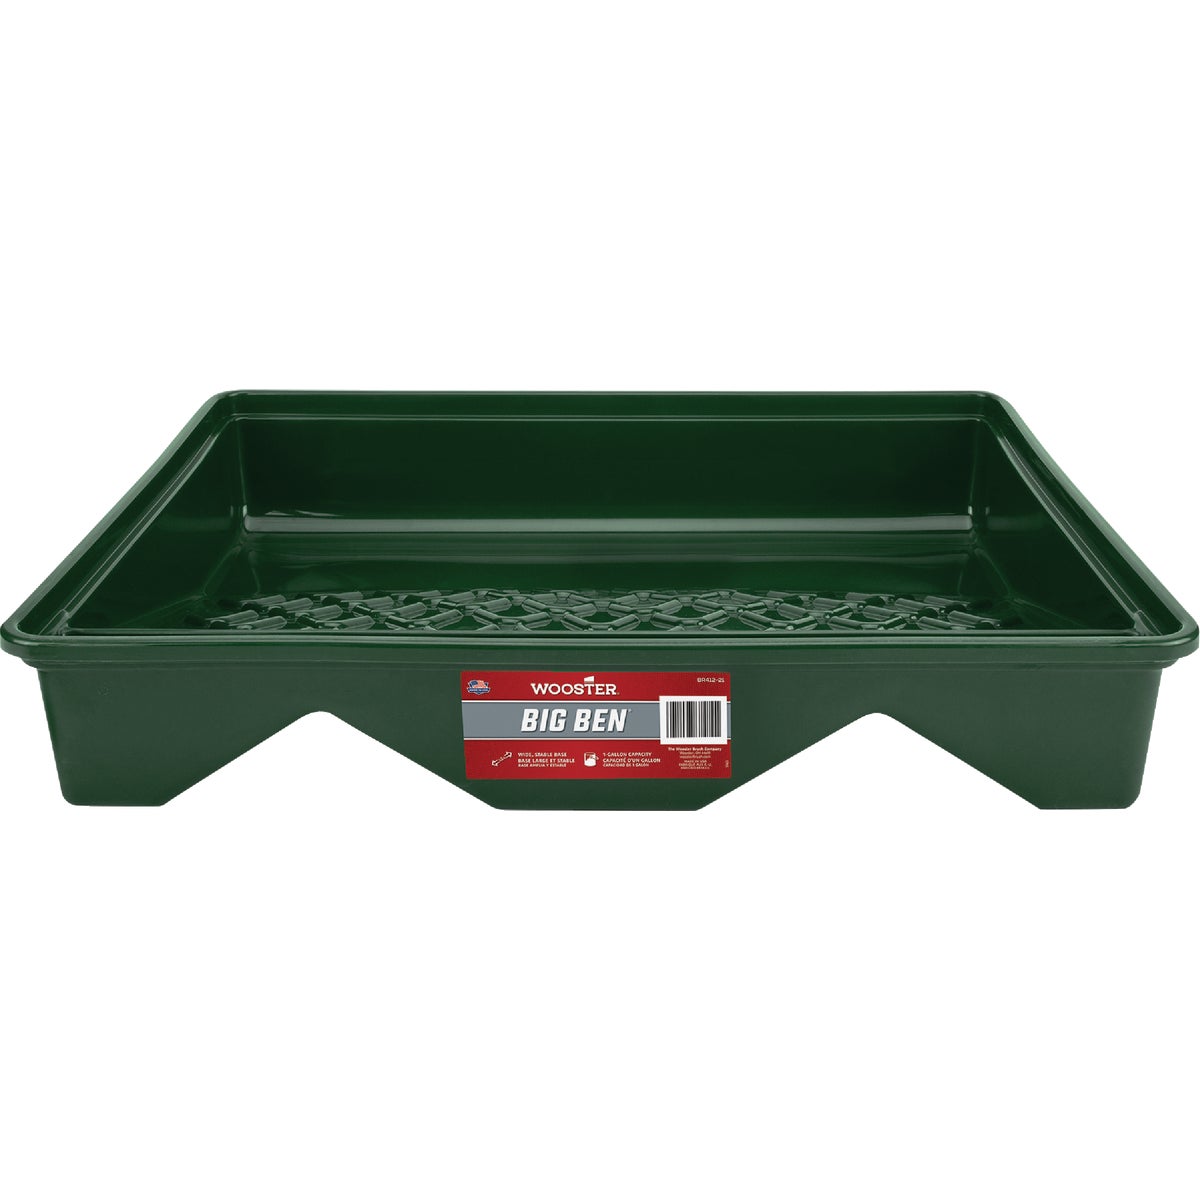 Item 794978, Big 21 In. polypropylene tray provides roll-off area for 18 In. frames.